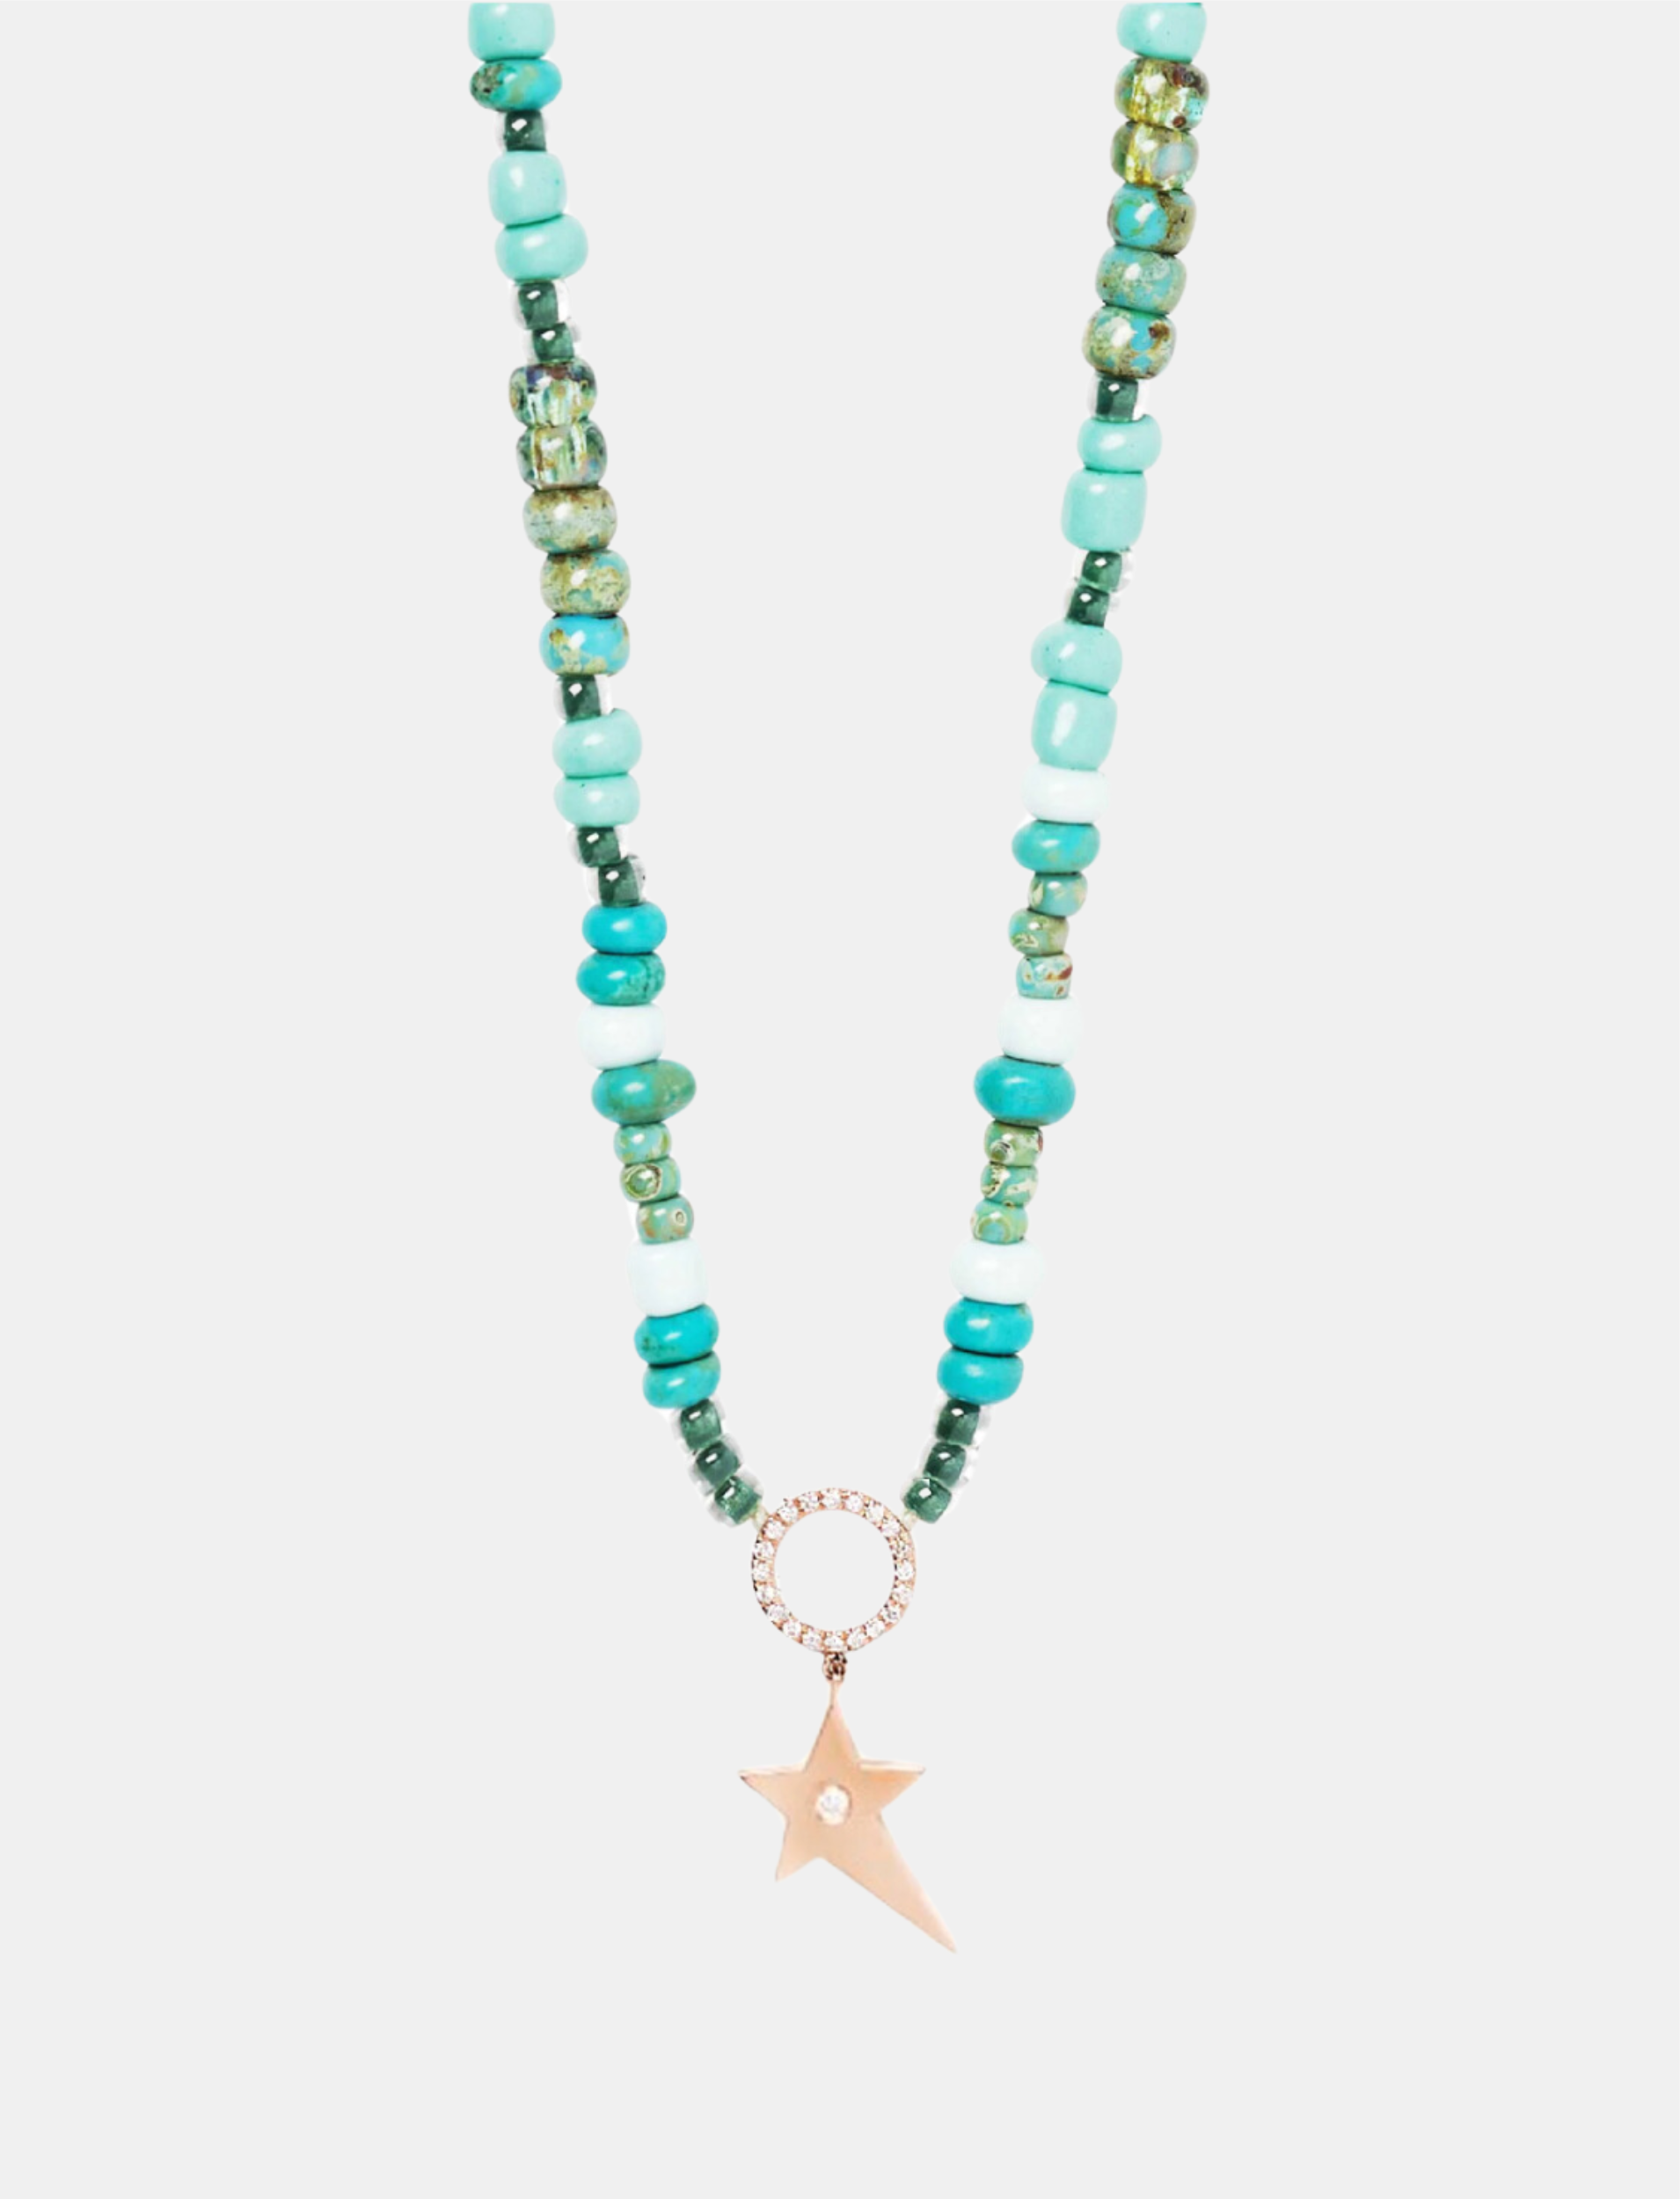 Star Hippie Necklace with Turquoise Beads